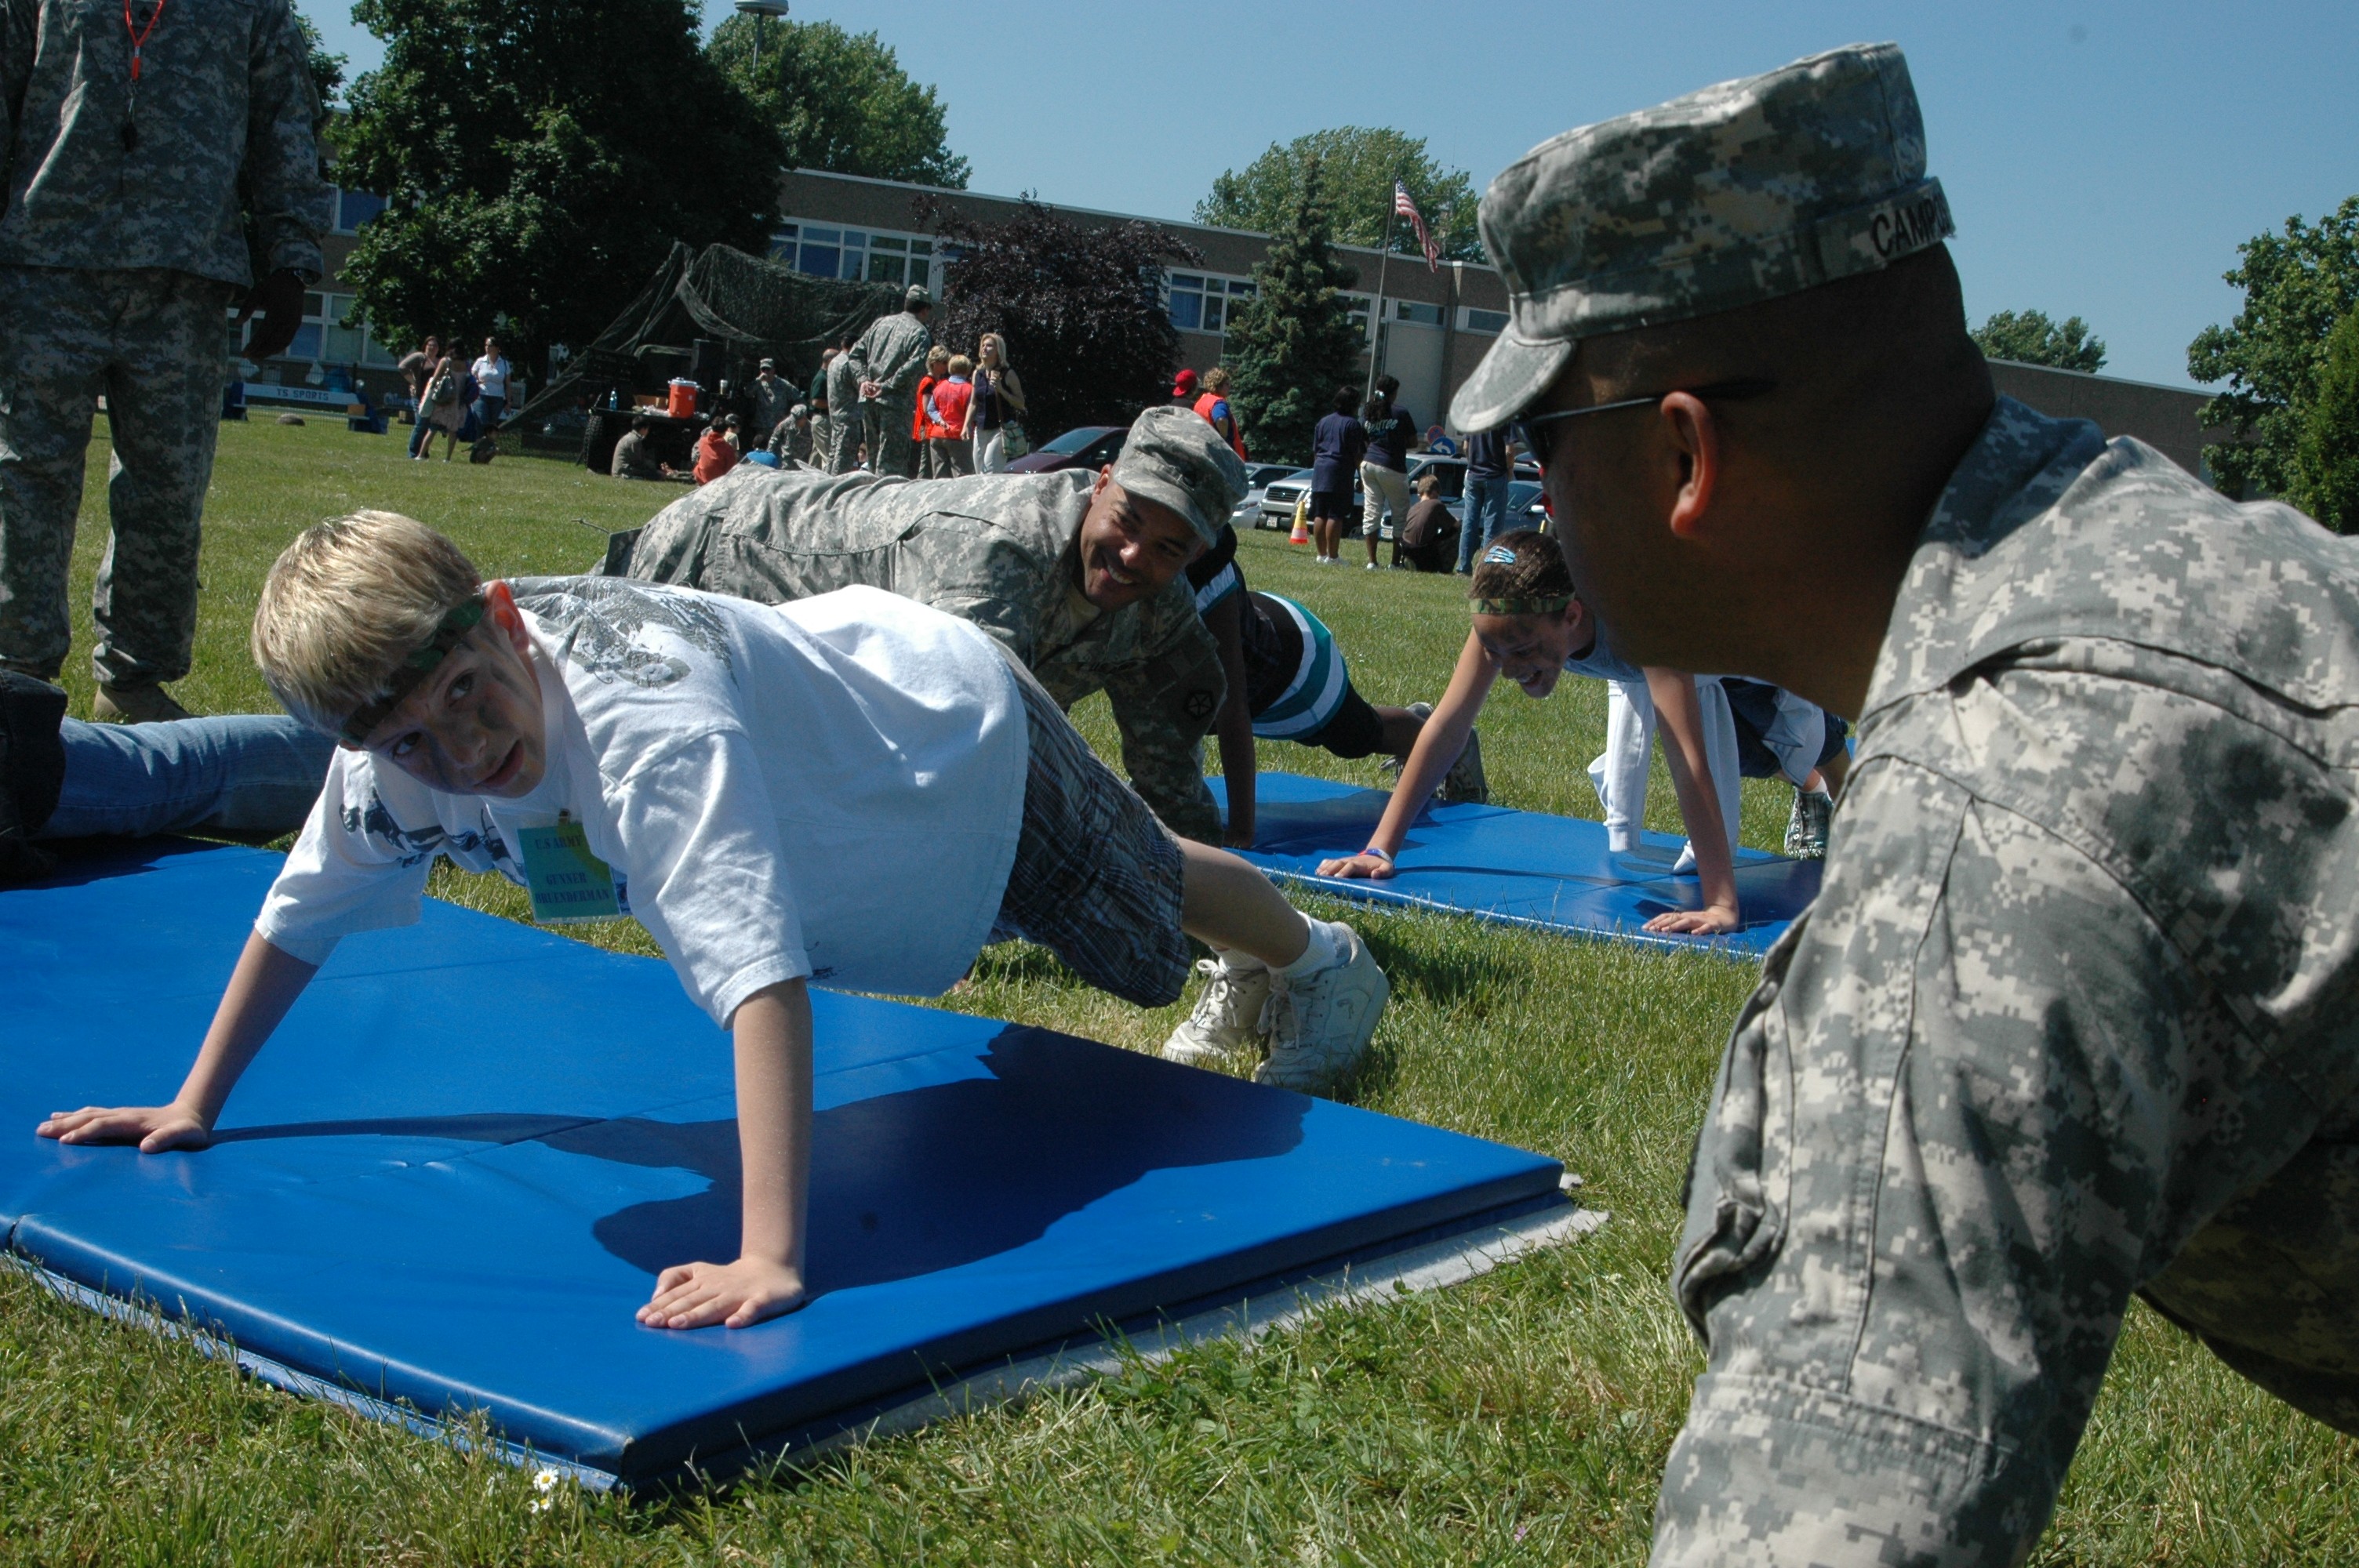 Kids spend a day in the life of Soldierparents during 'boot camp